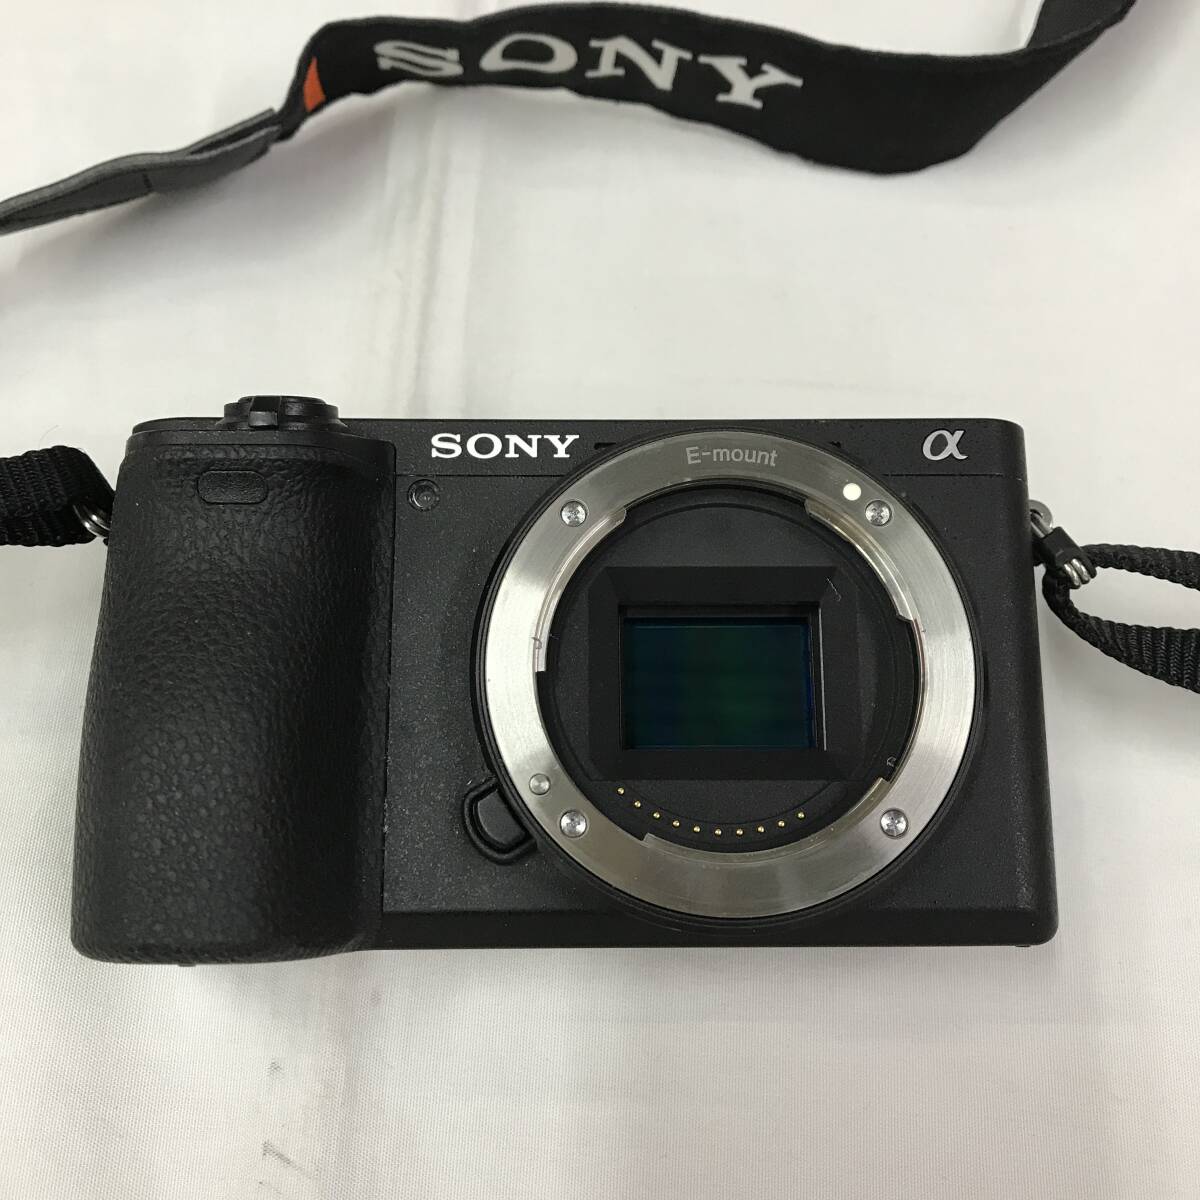 sy093 送料無料！バッテリー無し現状品 SONY ソニー α6500 ボディ ILCE-6500の画像2